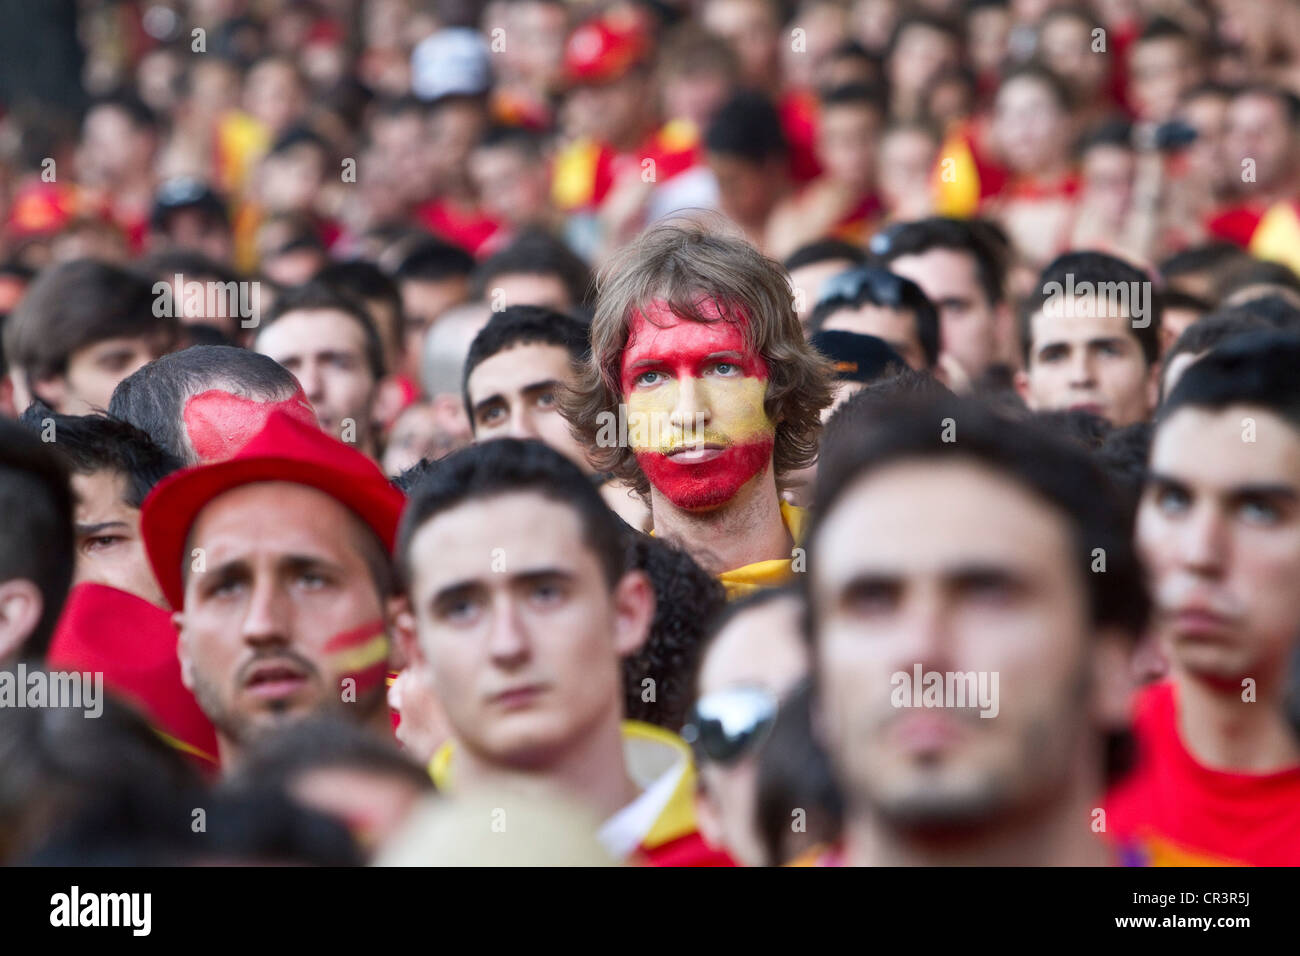 Spanish supporters during final match, 2010 FIFA World Cup Final, Madrid, Spain, Europe Stock Photo